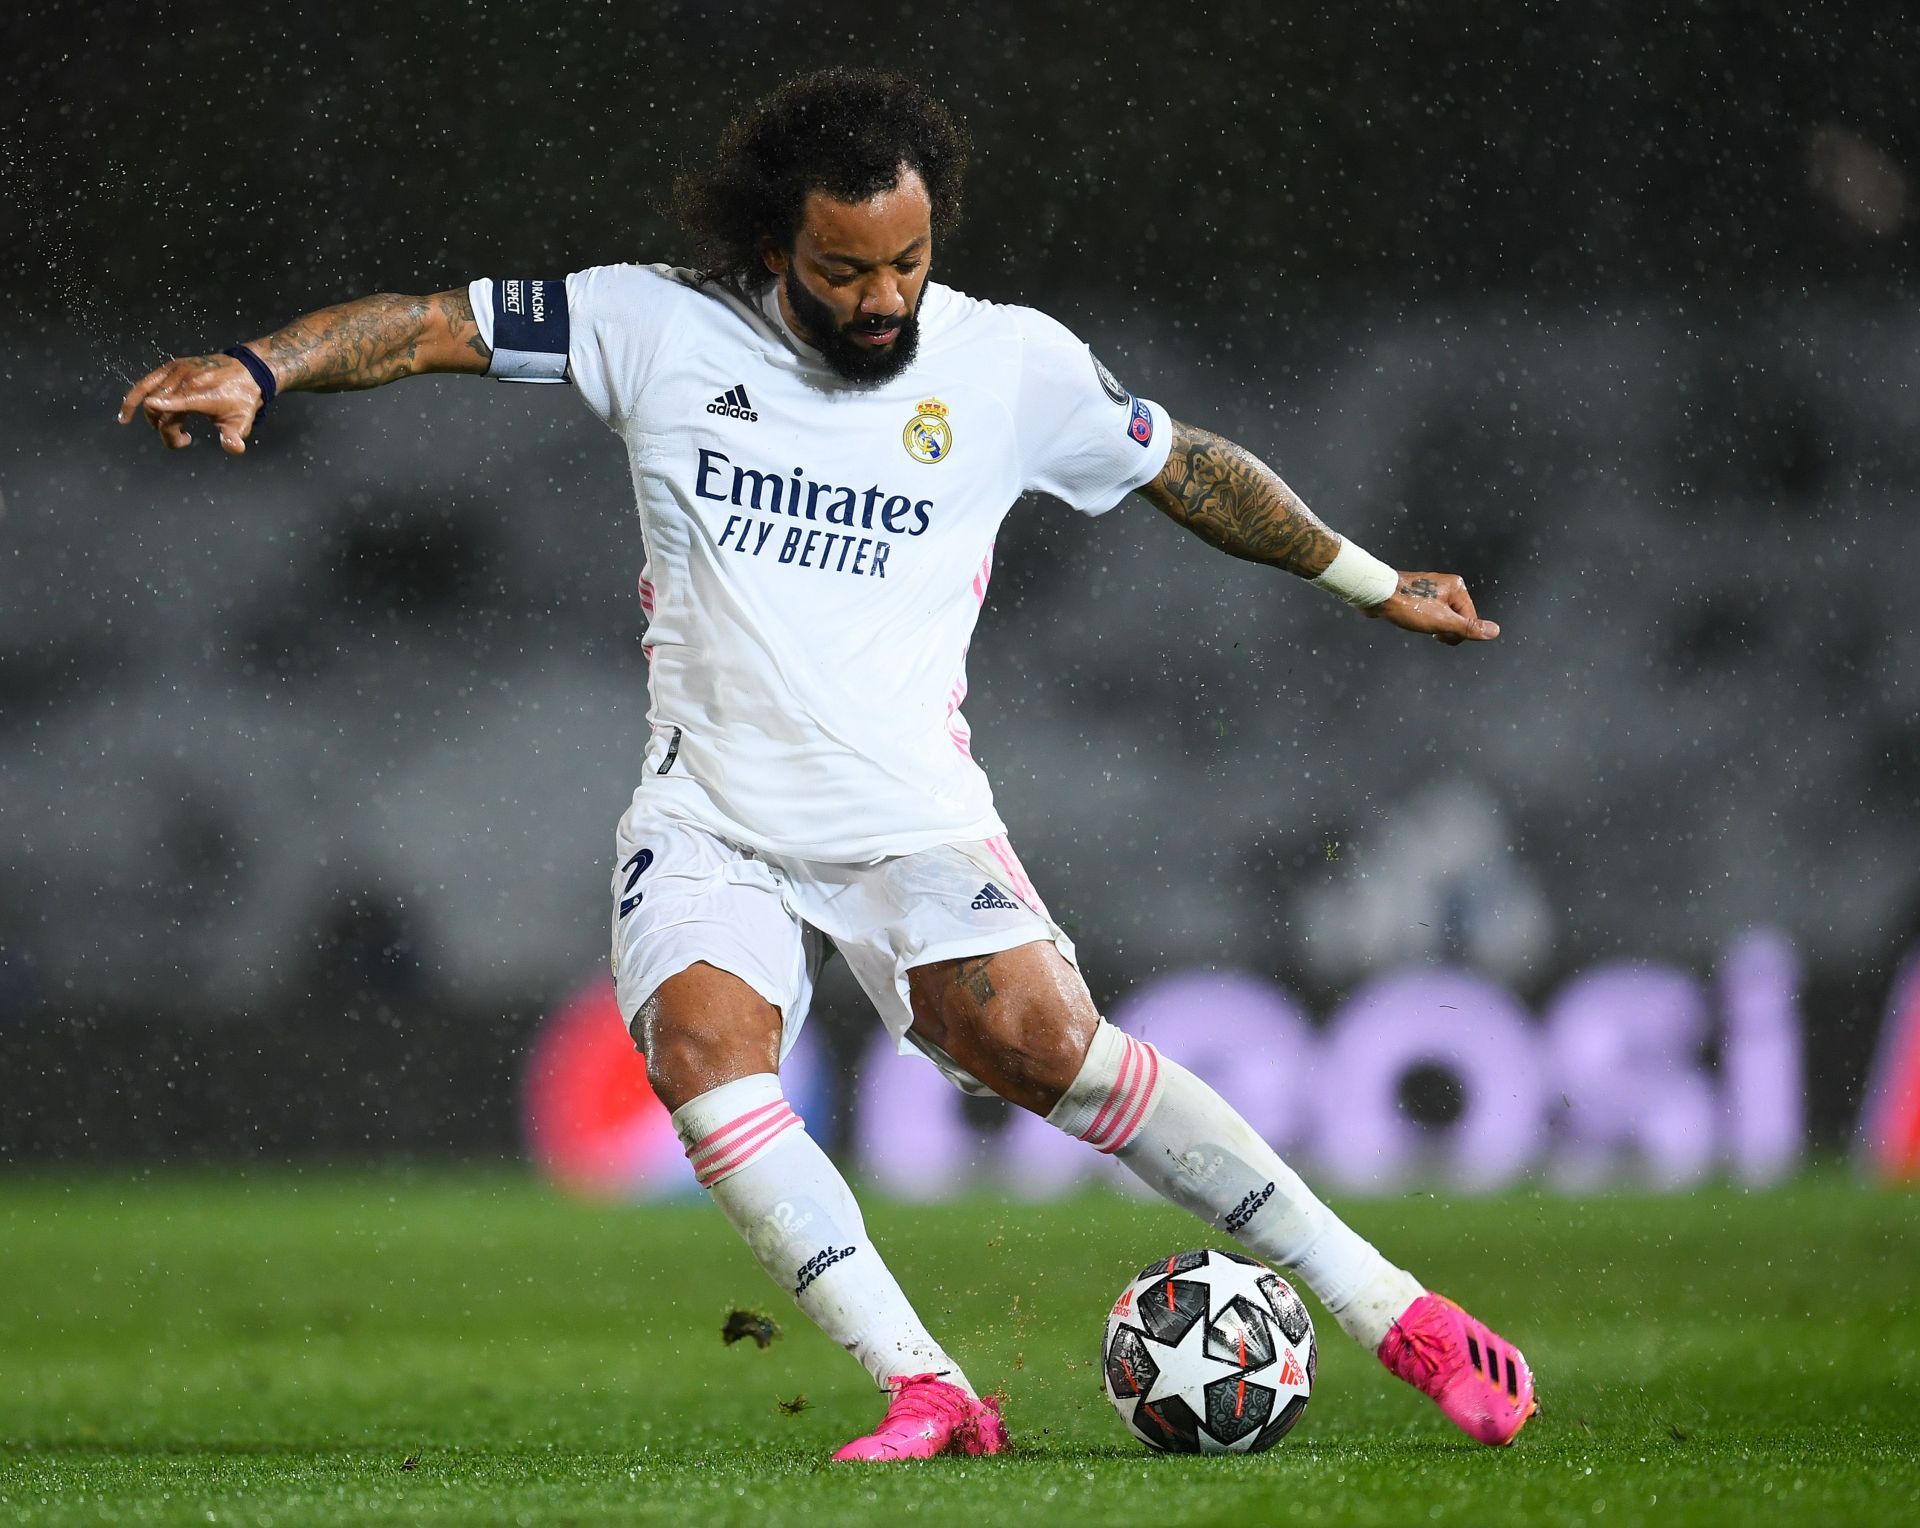 Marcelo will be looking to turn back the years